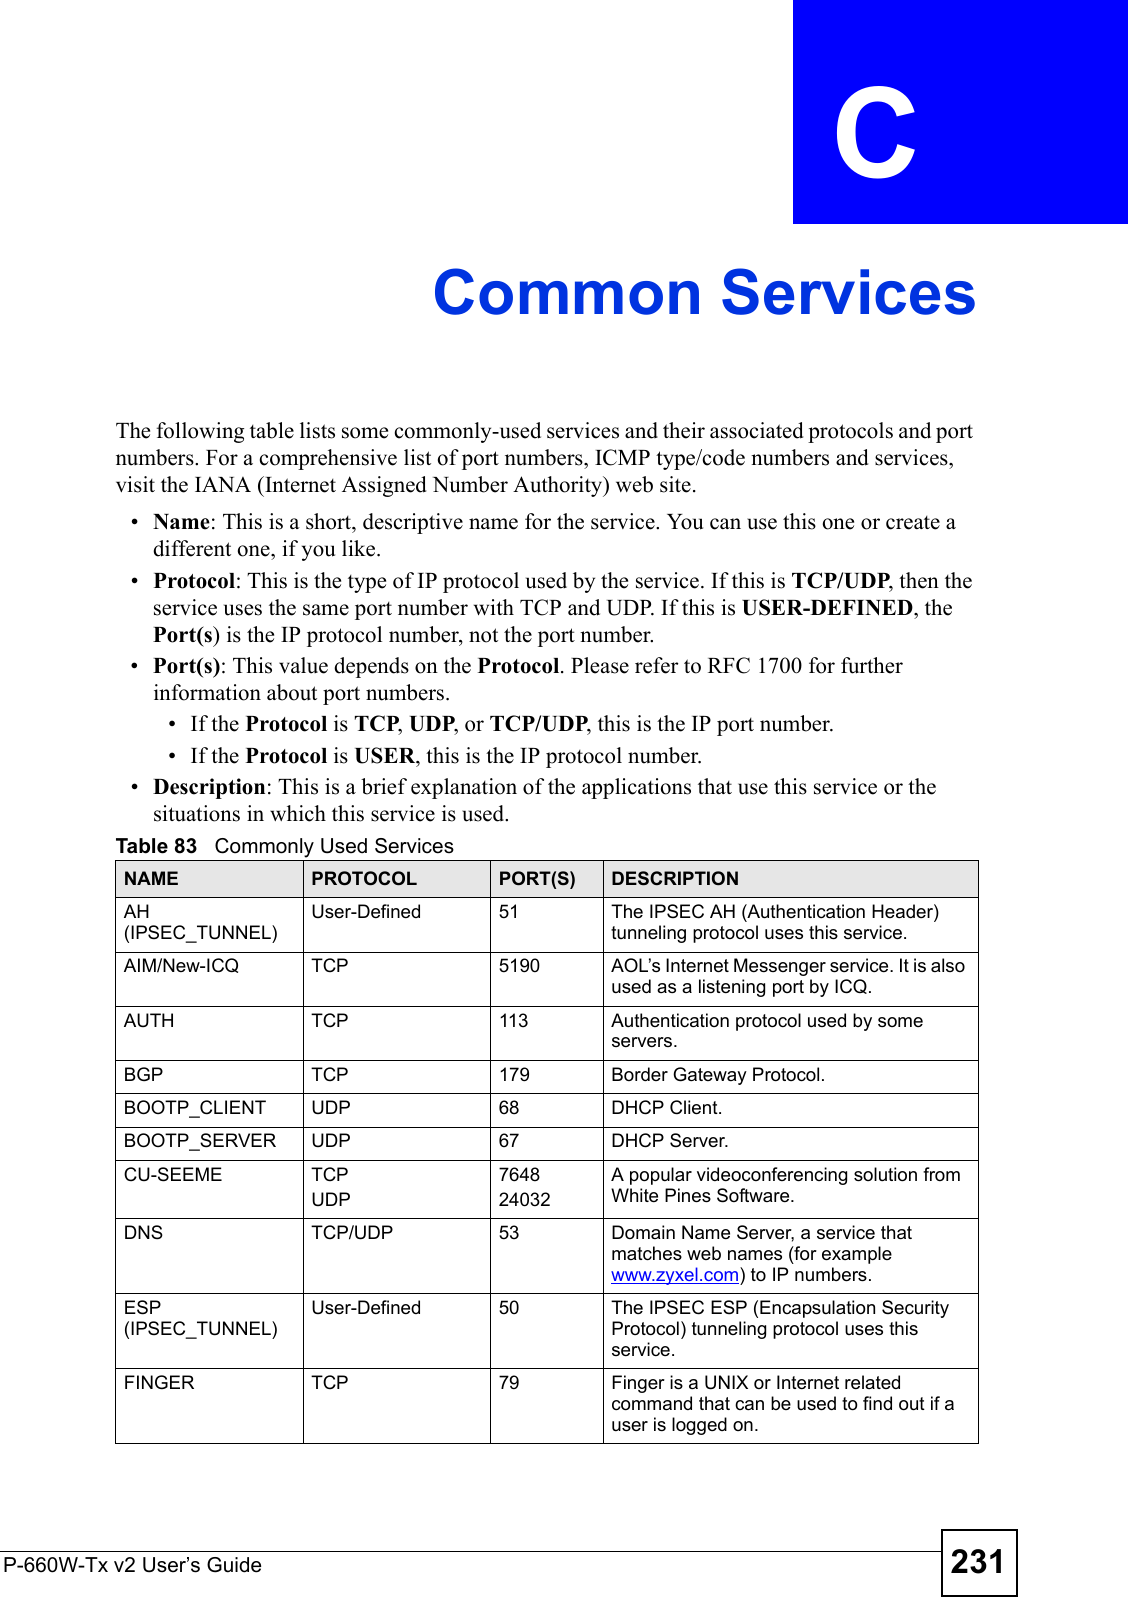 P-660W-Tx v2 User’s Guide 231APPENDIX  C Common ServicesThe following table lists some commonly-used services and their associated protocols and port numbers. For a comprehensive list of port numbers, ICMP type/code numbers and services, visit the IANA (Internet Assigned Number Authority) web site. •Name: This is a short, descriptive name for the service. You can use this one or create a different one, if you like.•Protocol: This is the type of IP protocol used by the service. If this is TCP/UDP, then the service uses the same port number with TCP and UDP. If this is USER-DEFINED, the Port(s) is the IP protocol number, not the port number.•Port(s): This value depends on the Protocol. Please refer to RFC 1700 for further information about port numbers.• If the Protocol is TCP, UDP, or TCP/UDP, this is the IP port number.• If the Protocol is USER, this is the IP protocol number.•Description: This is a brief explanation of the applications that use this service or the situations in which this service is used.Table 83   Commonly Used ServicesNAME PROTOCOL PORT(S) DESCRIPTIONAH (IPSEC_TUNNEL)User-Defined 51 The IPSEC AH (Authentication Header) tunneling protocol uses this service.AIM/New-ICQ TCP 5190 AOL’s Internet Messenger service. It is also used as a listening port by ICQ.AUTH TCP 113 Authentication protocol used by some servers.BGP TCP 179 Border Gateway Protocol.BOOTP_CLIENT UDP 68 DHCP Client.BOOTP_SERVER UDP 67 DHCP Server.CU-SEEME TCPUDP764824032A popular videoconferencing solution from White Pines Software.DNS TCP/UDP 53 Domain Name Server, a service that matches web names (for example www.zyxel.com) to IP numbers.ESP (IPSEC_TUNNEL)User-Defined 50 The IPSEC ESP (Encapsulation Security Protocol) tunneling protocol uses this service.FINGER TCP 79 Finger is a UNIX or Internet related command that can be used to find out if a user is logged on.